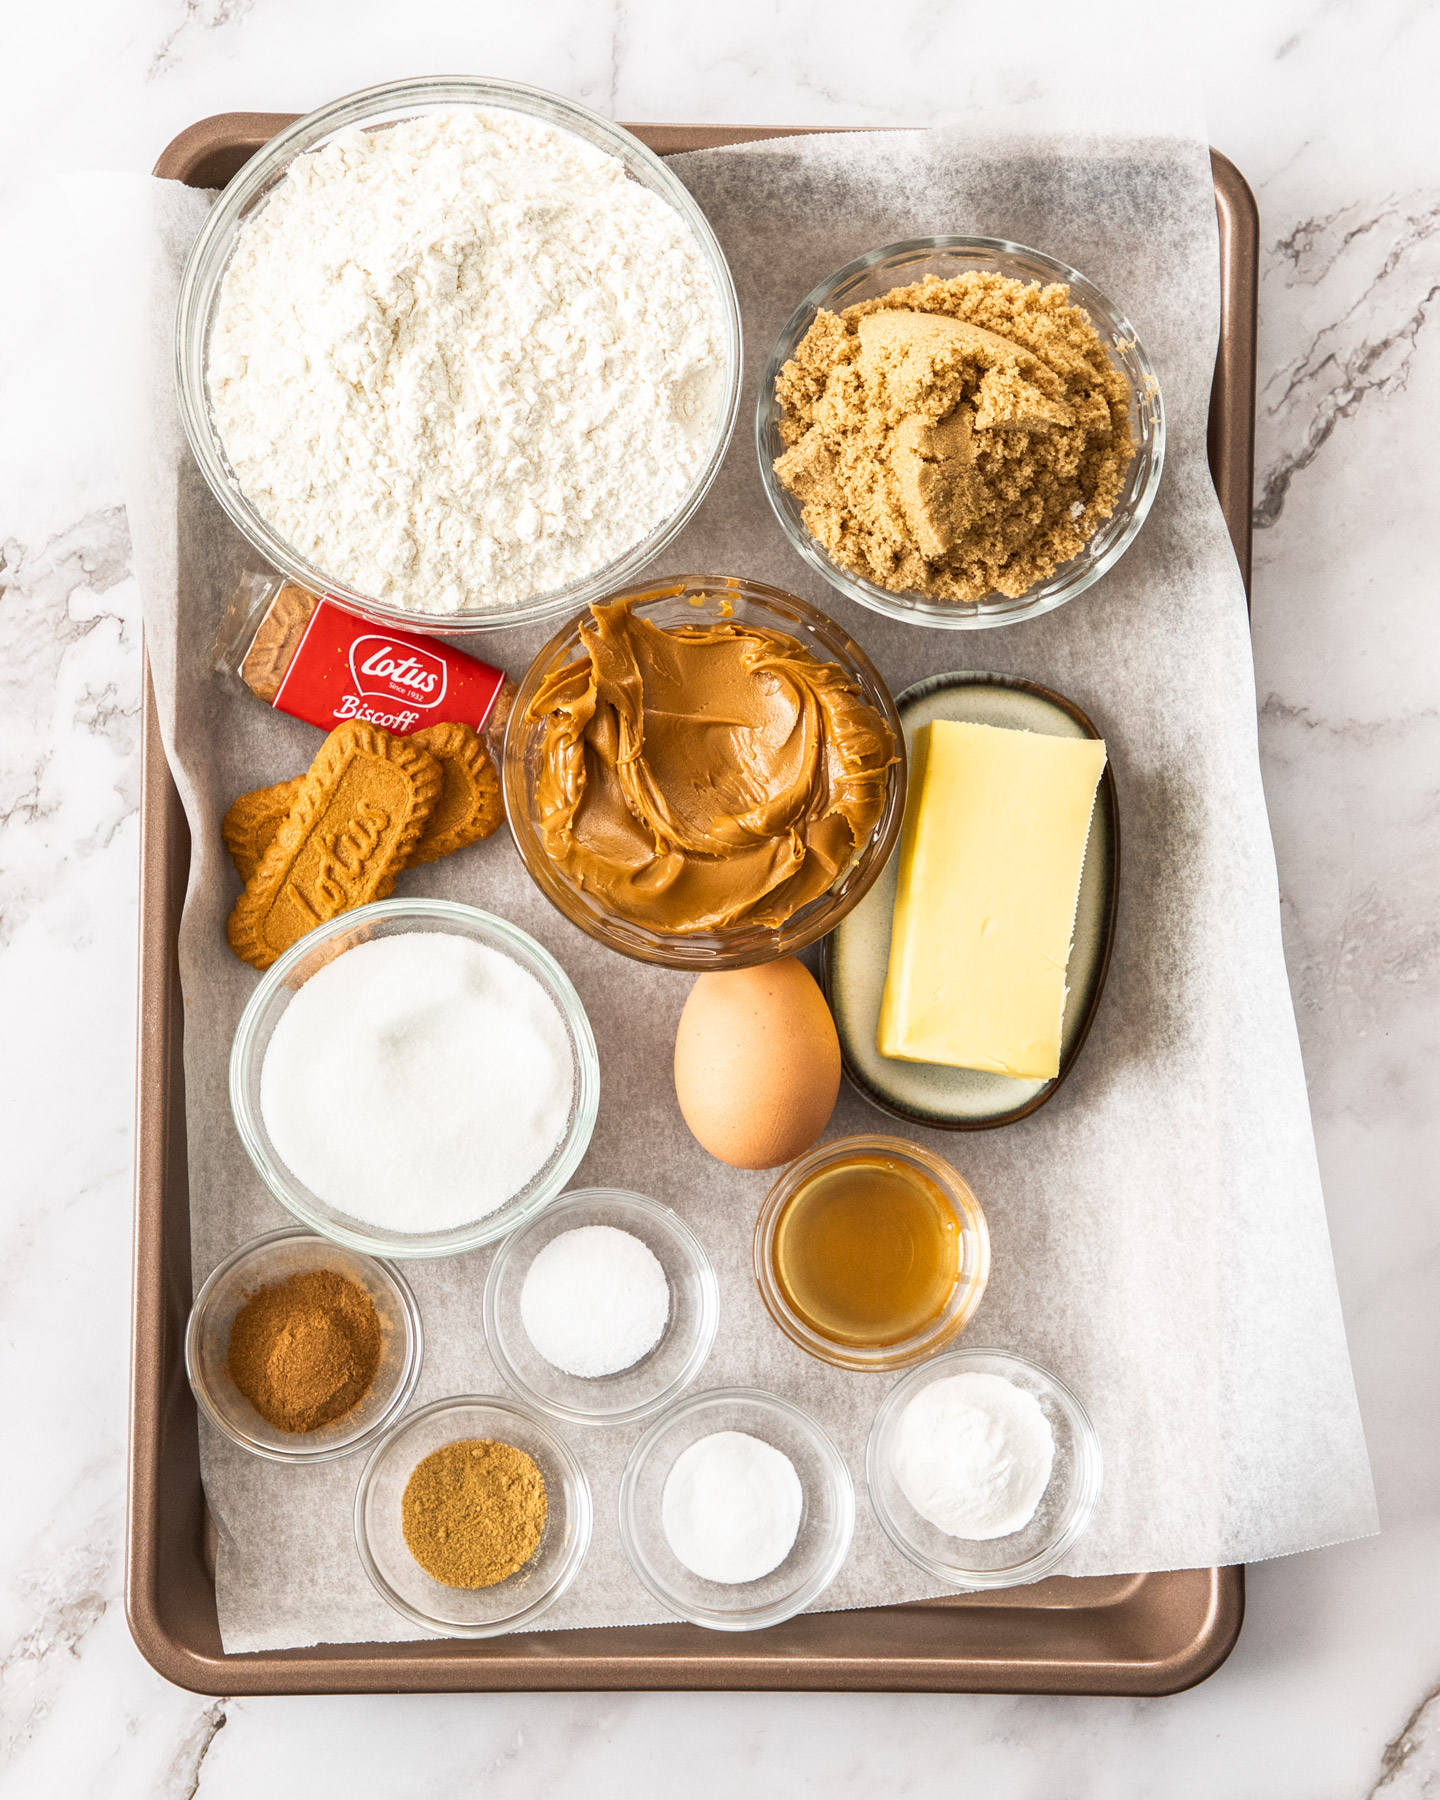 Ingredients for Biscoff butter cookies on a baking tray.